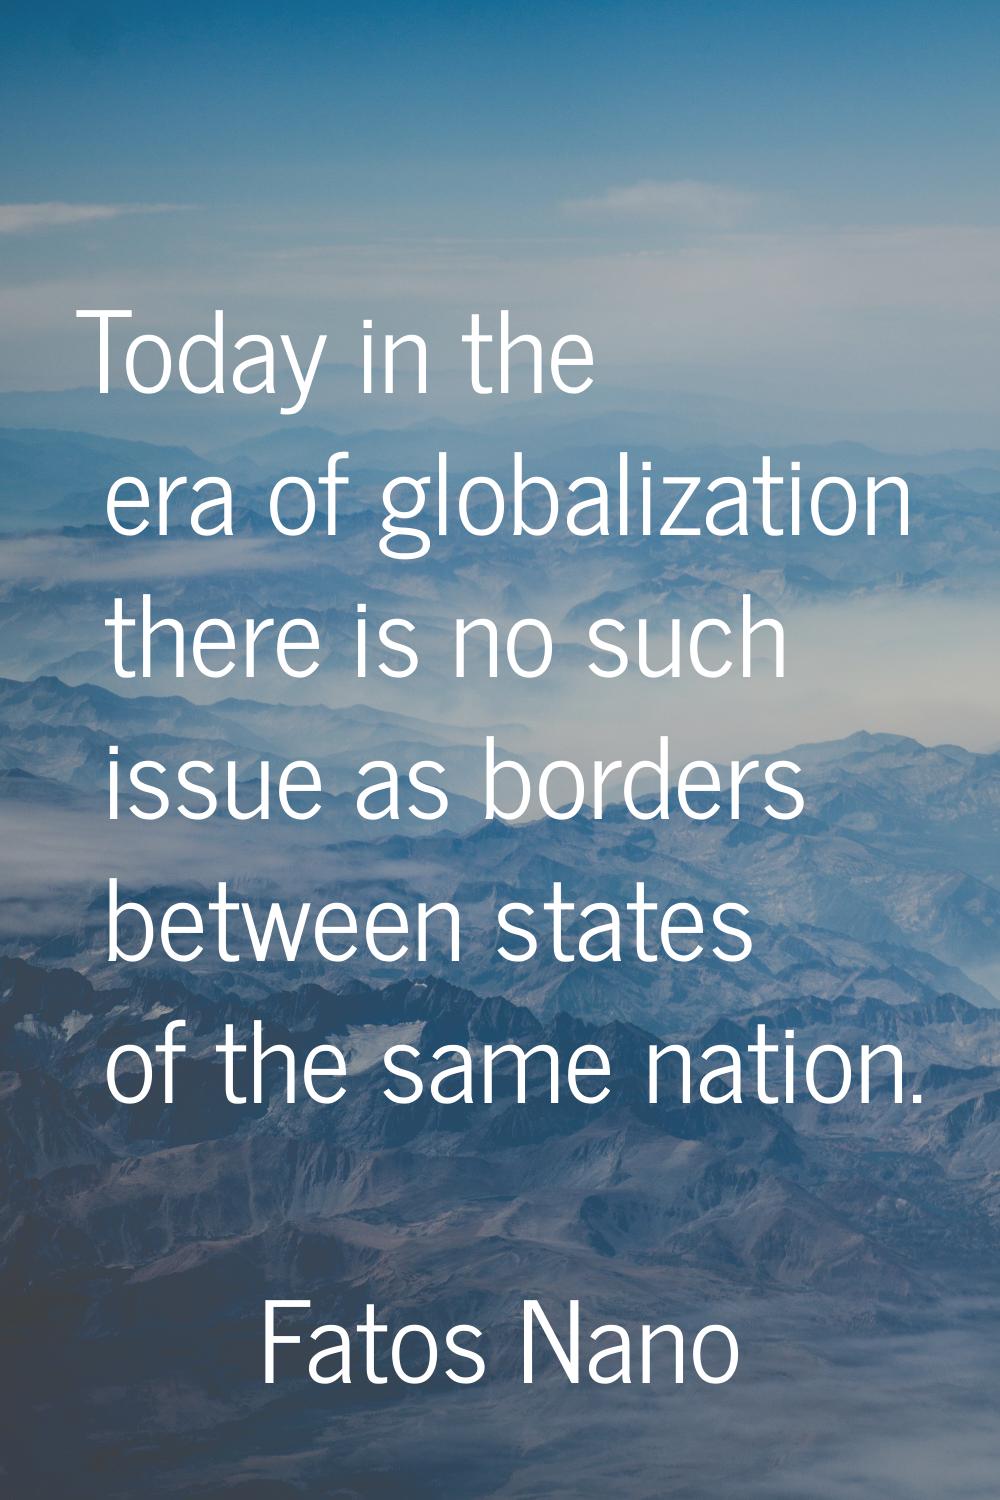 Today in the era of globalization there is no such issue as borders between states of the same nati